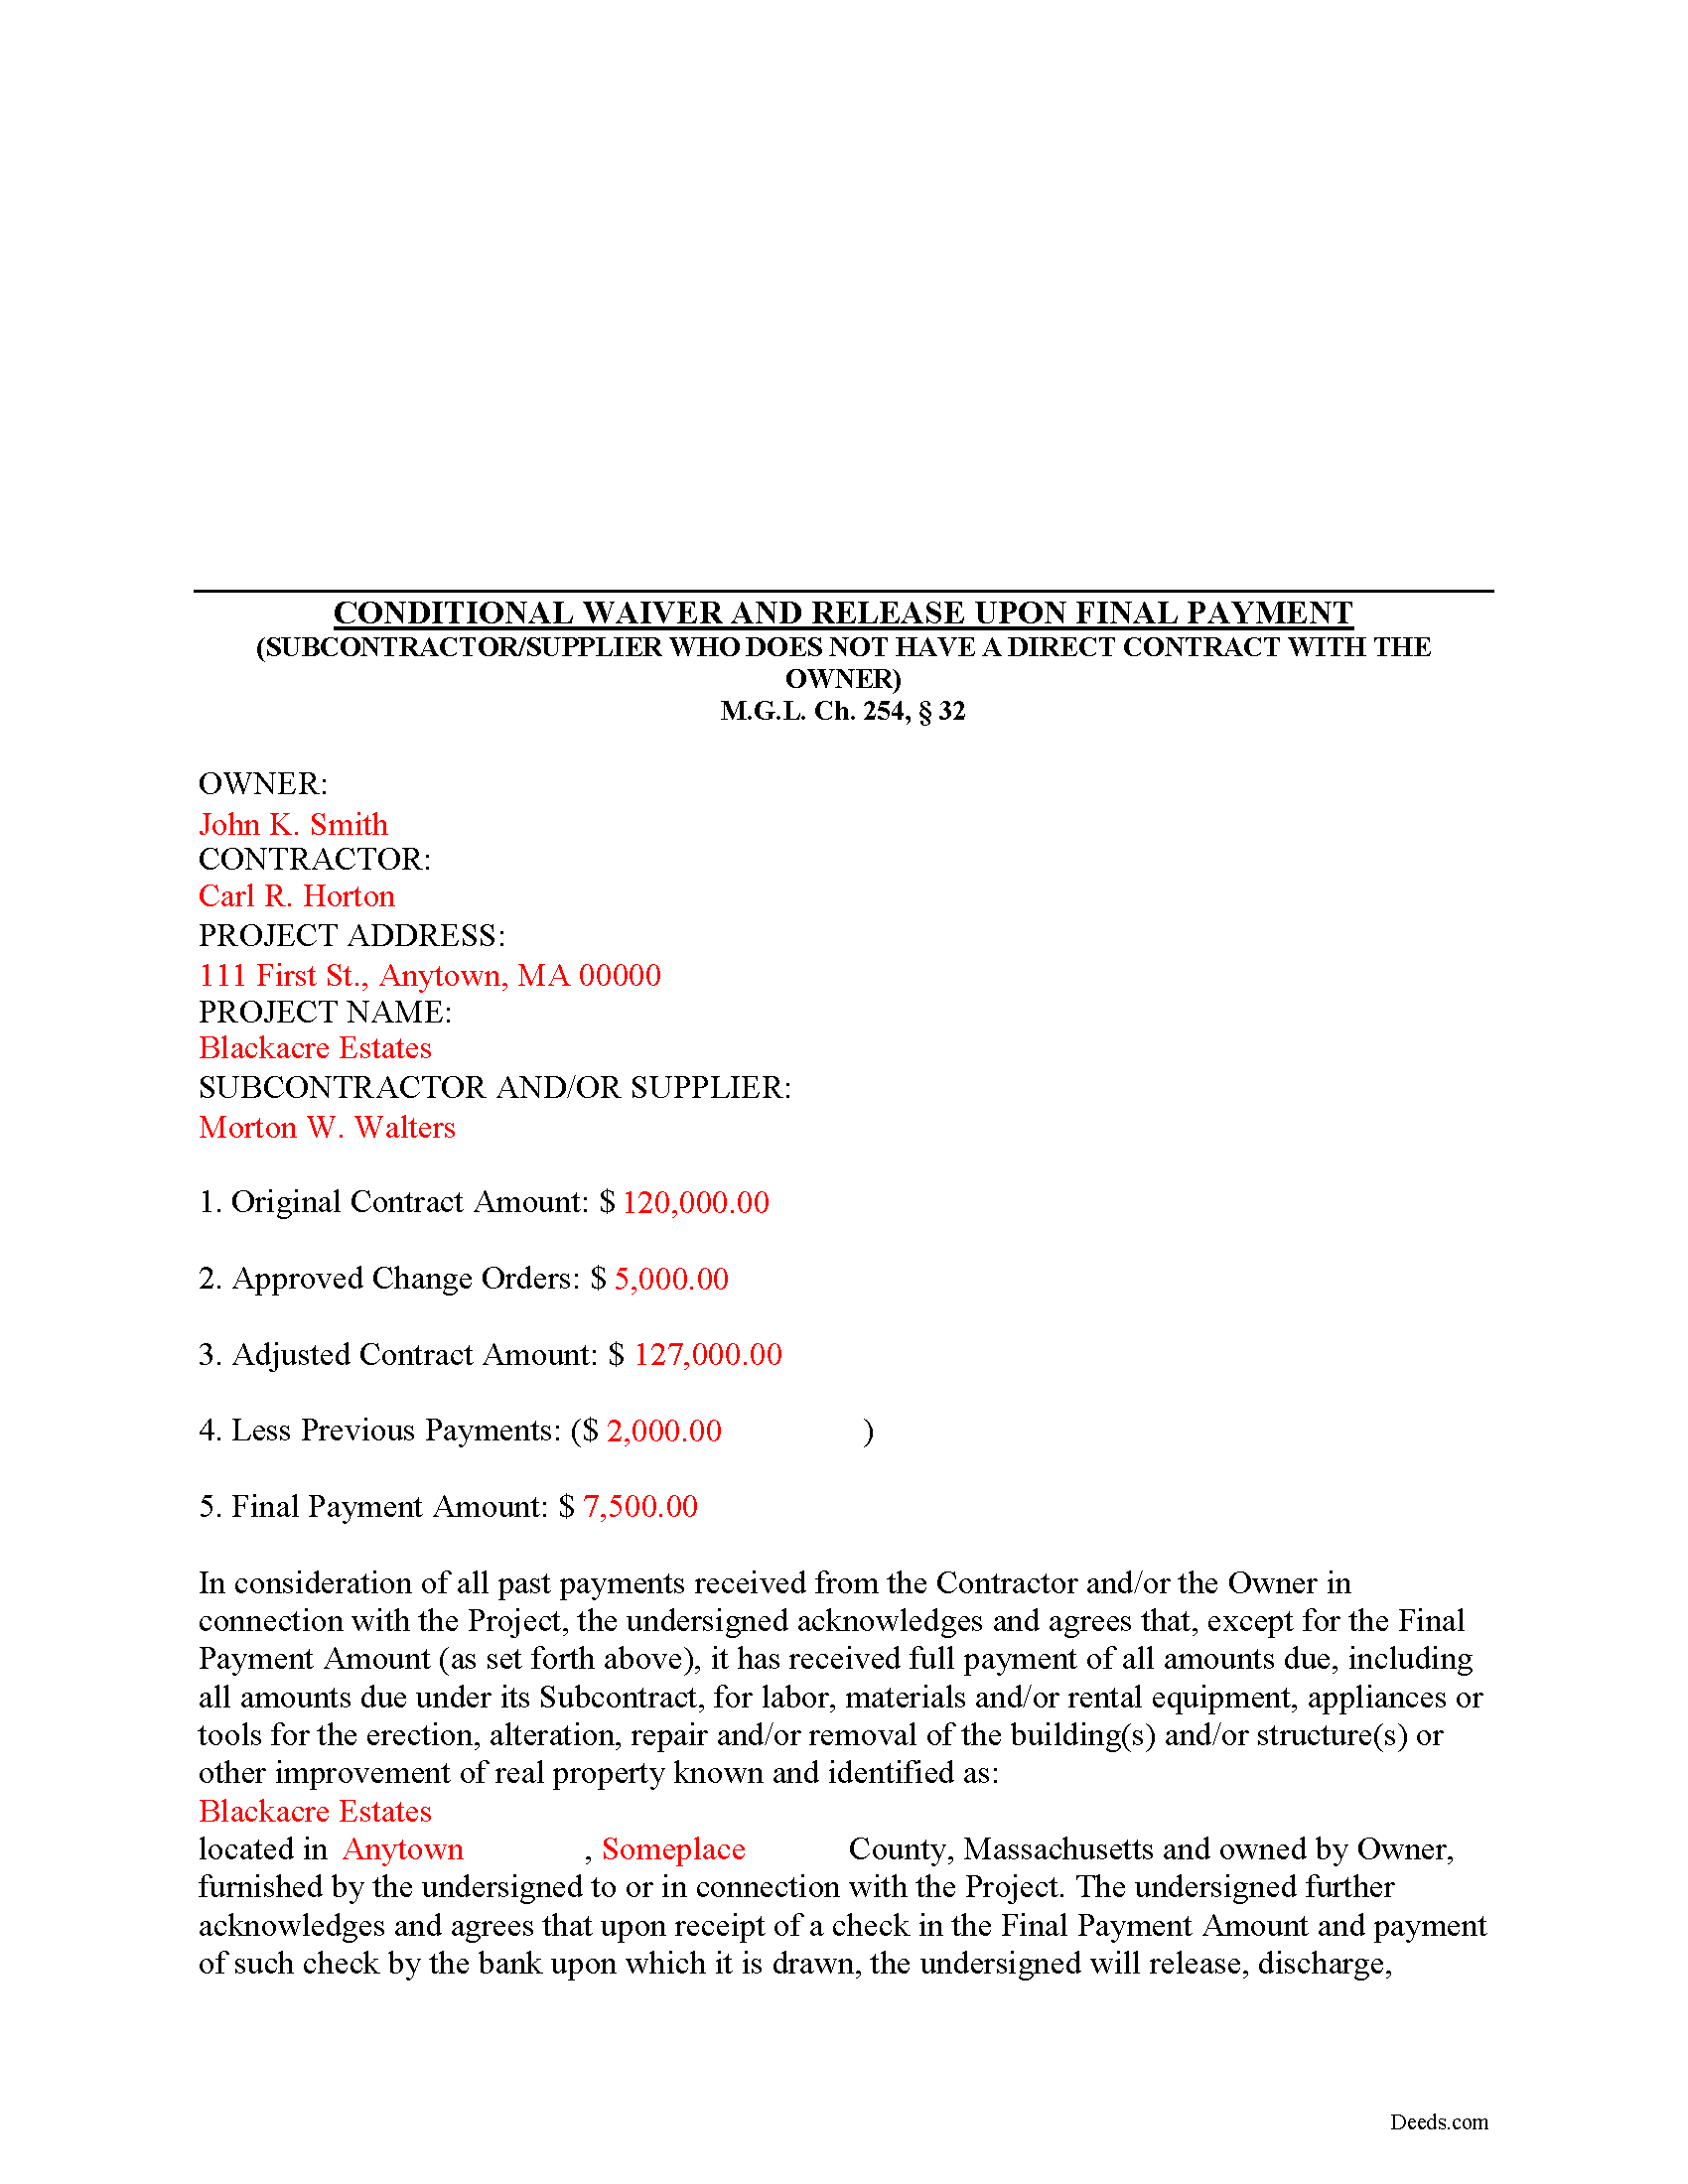 Completed Example of the Subcontractor Full Conditional Lien Waiver Document